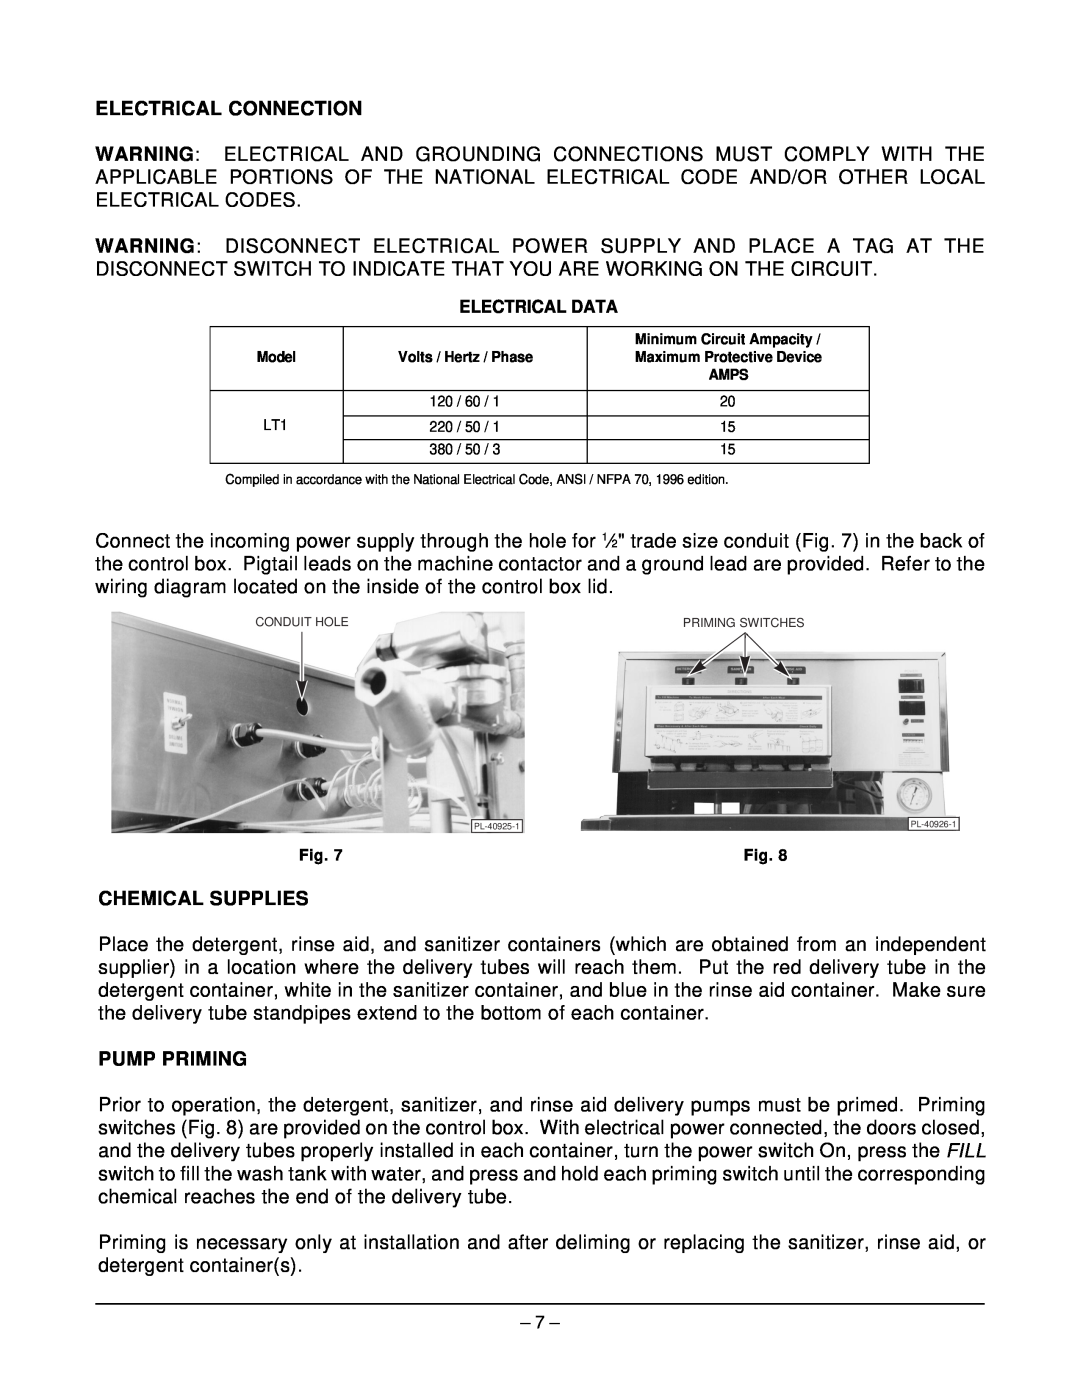 Hobart LT1 ML-104239 manual Electrical Connection, Chemical Supplies, Pump Priming, Electrical Data 